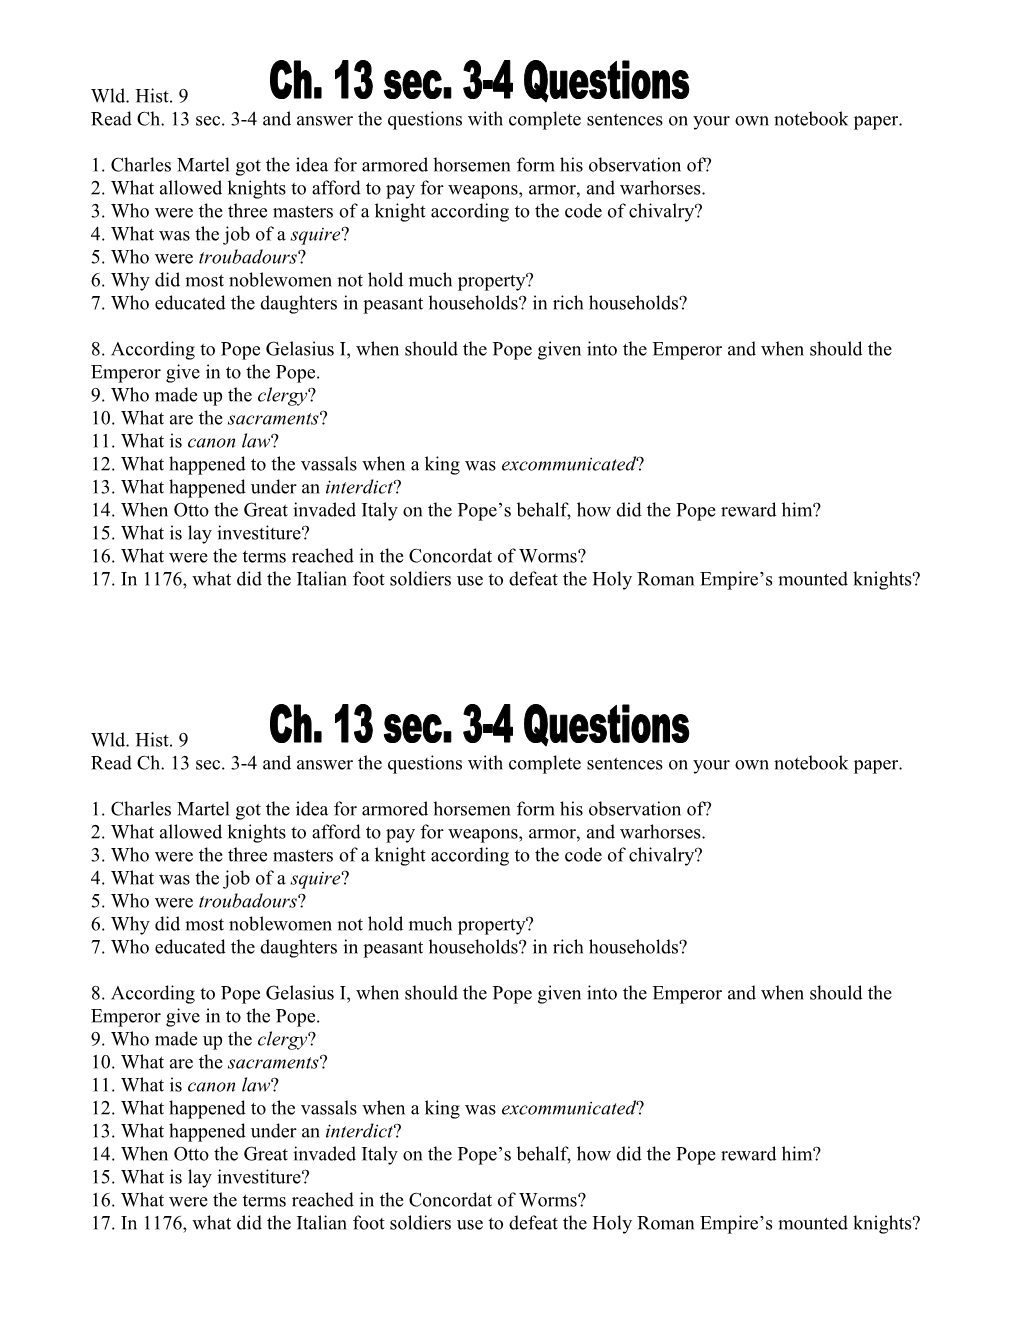 Read Ch. 13 Sec. 3-4 and Answer the Questions with Complete Sentences on Your Own Notebook